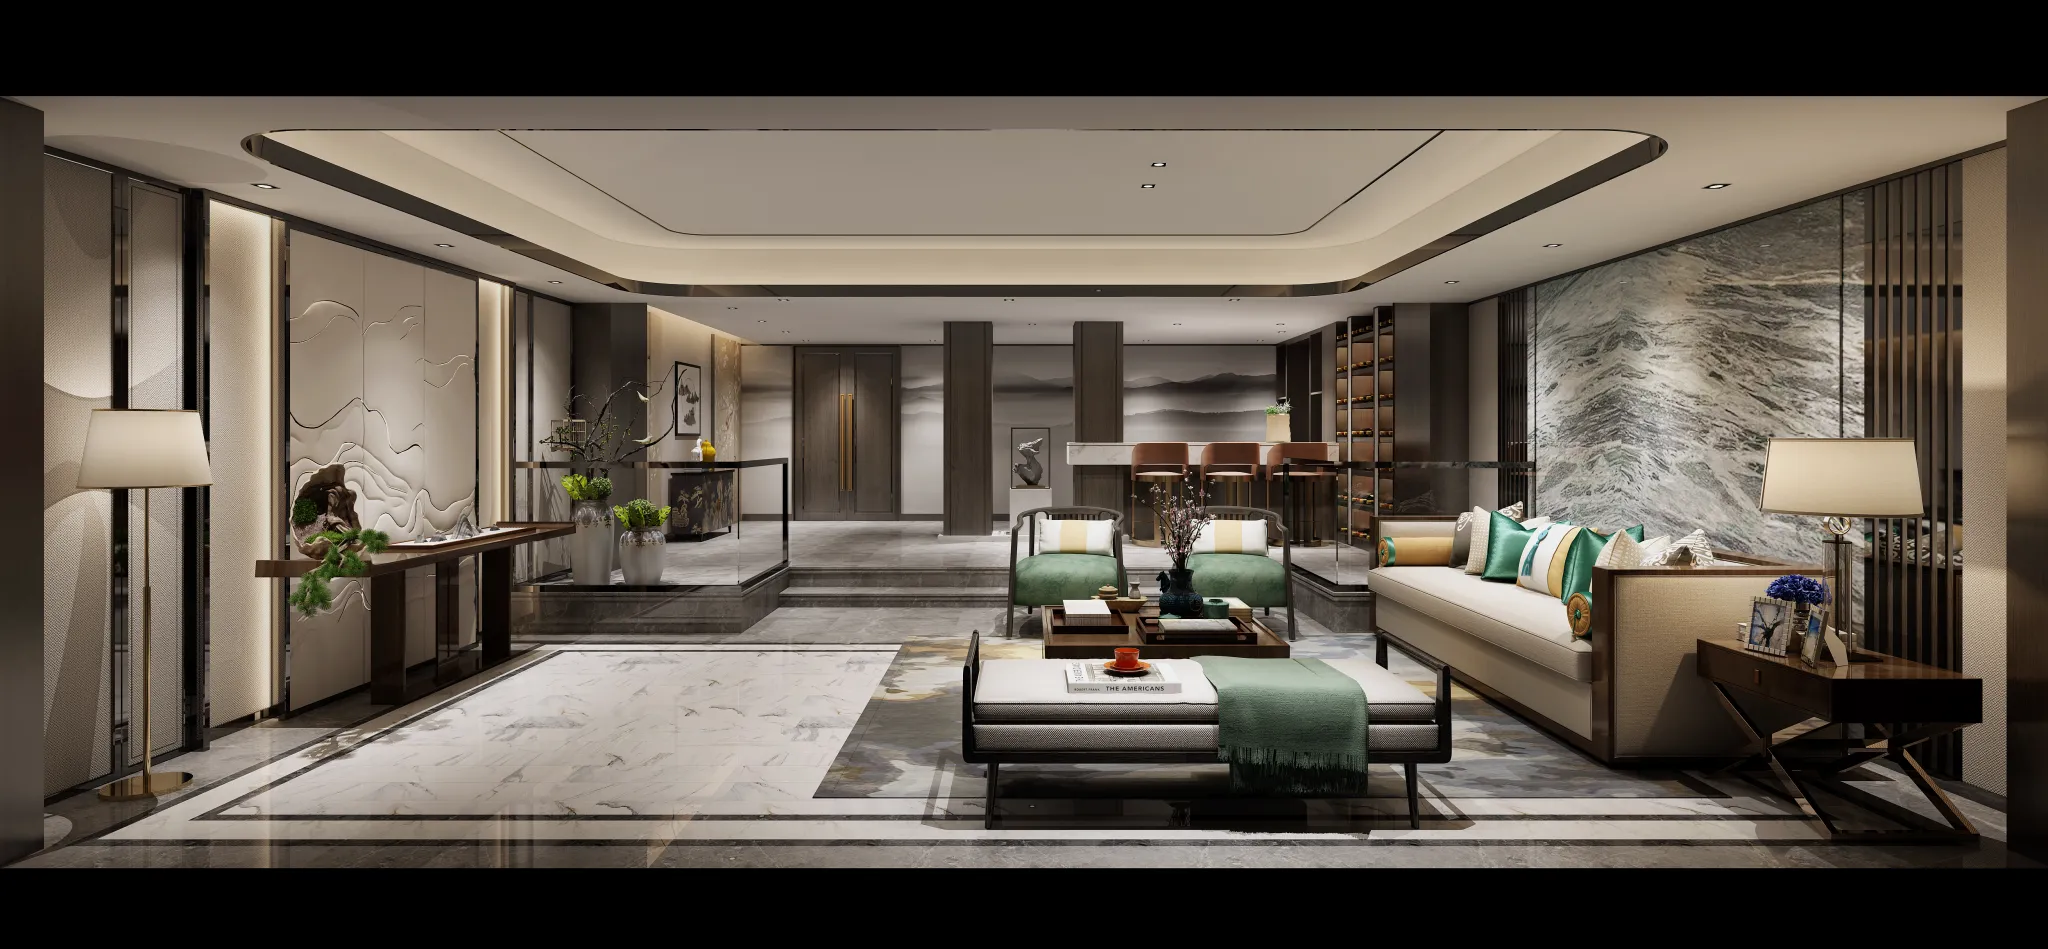 DESMOD INTERIOR 2021 (VRAY) – 4. LIVING ROOM – CHINESE – 090